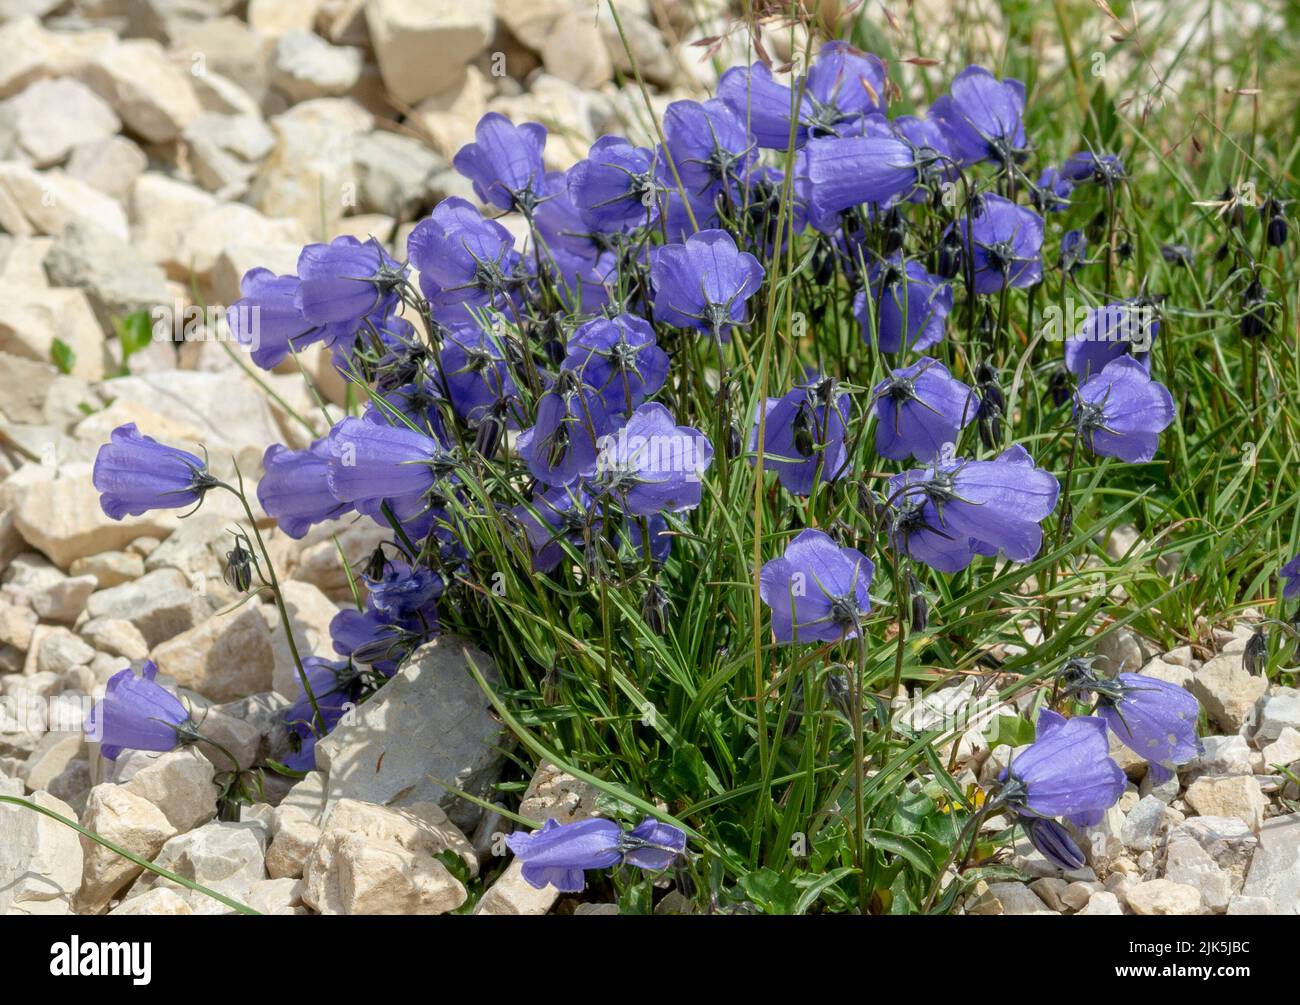 Blooming alpian bellflower or campanula morettiana. Flowering campanula di moretti or  moretti glockenblume in Dolomites. Italy. Stock Photo